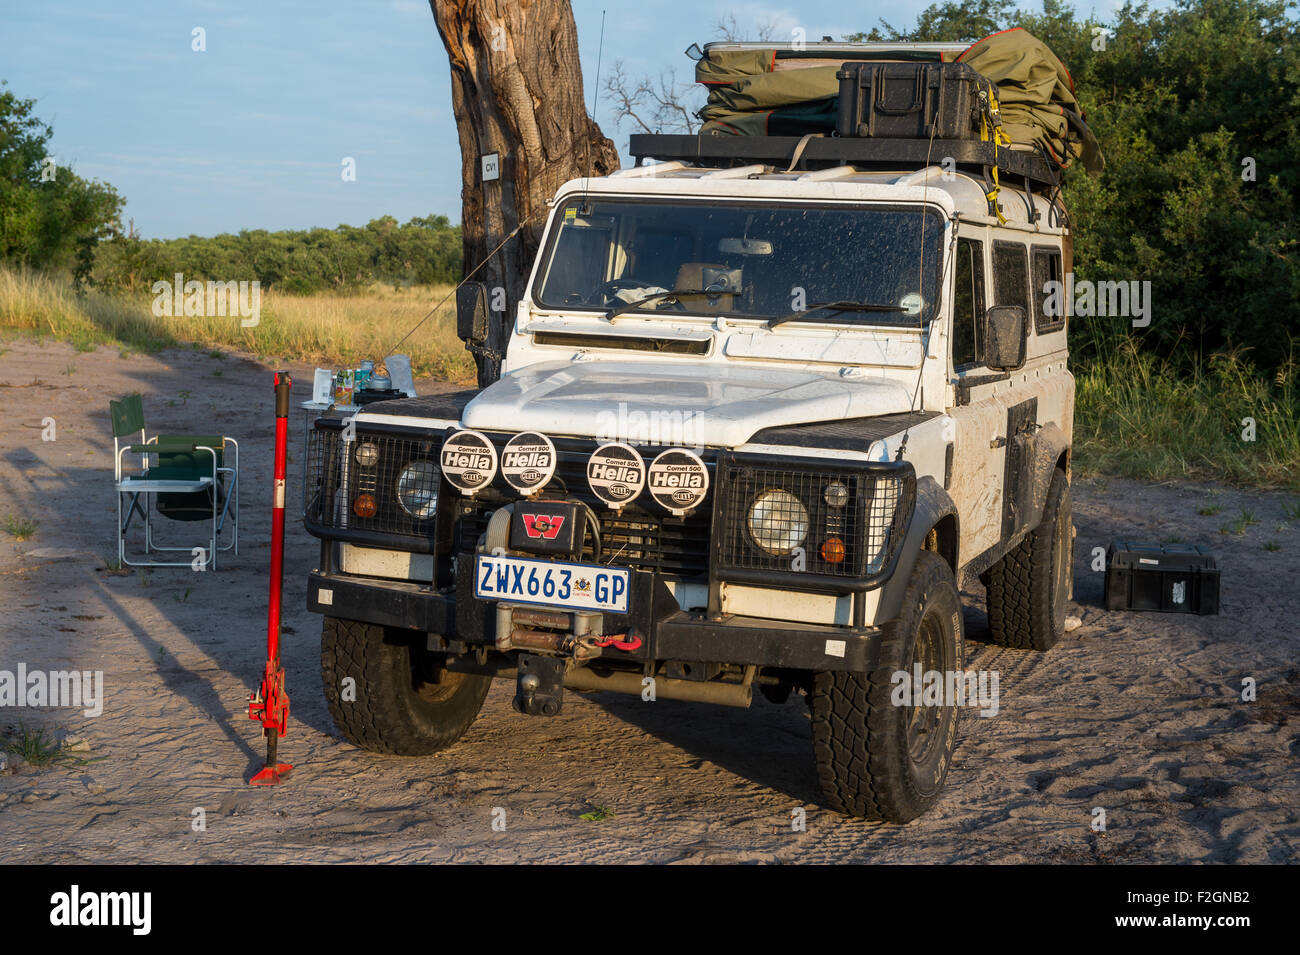 Land Rover parked on a dirt road with no one else around in Botswana, Africa Stock Photo